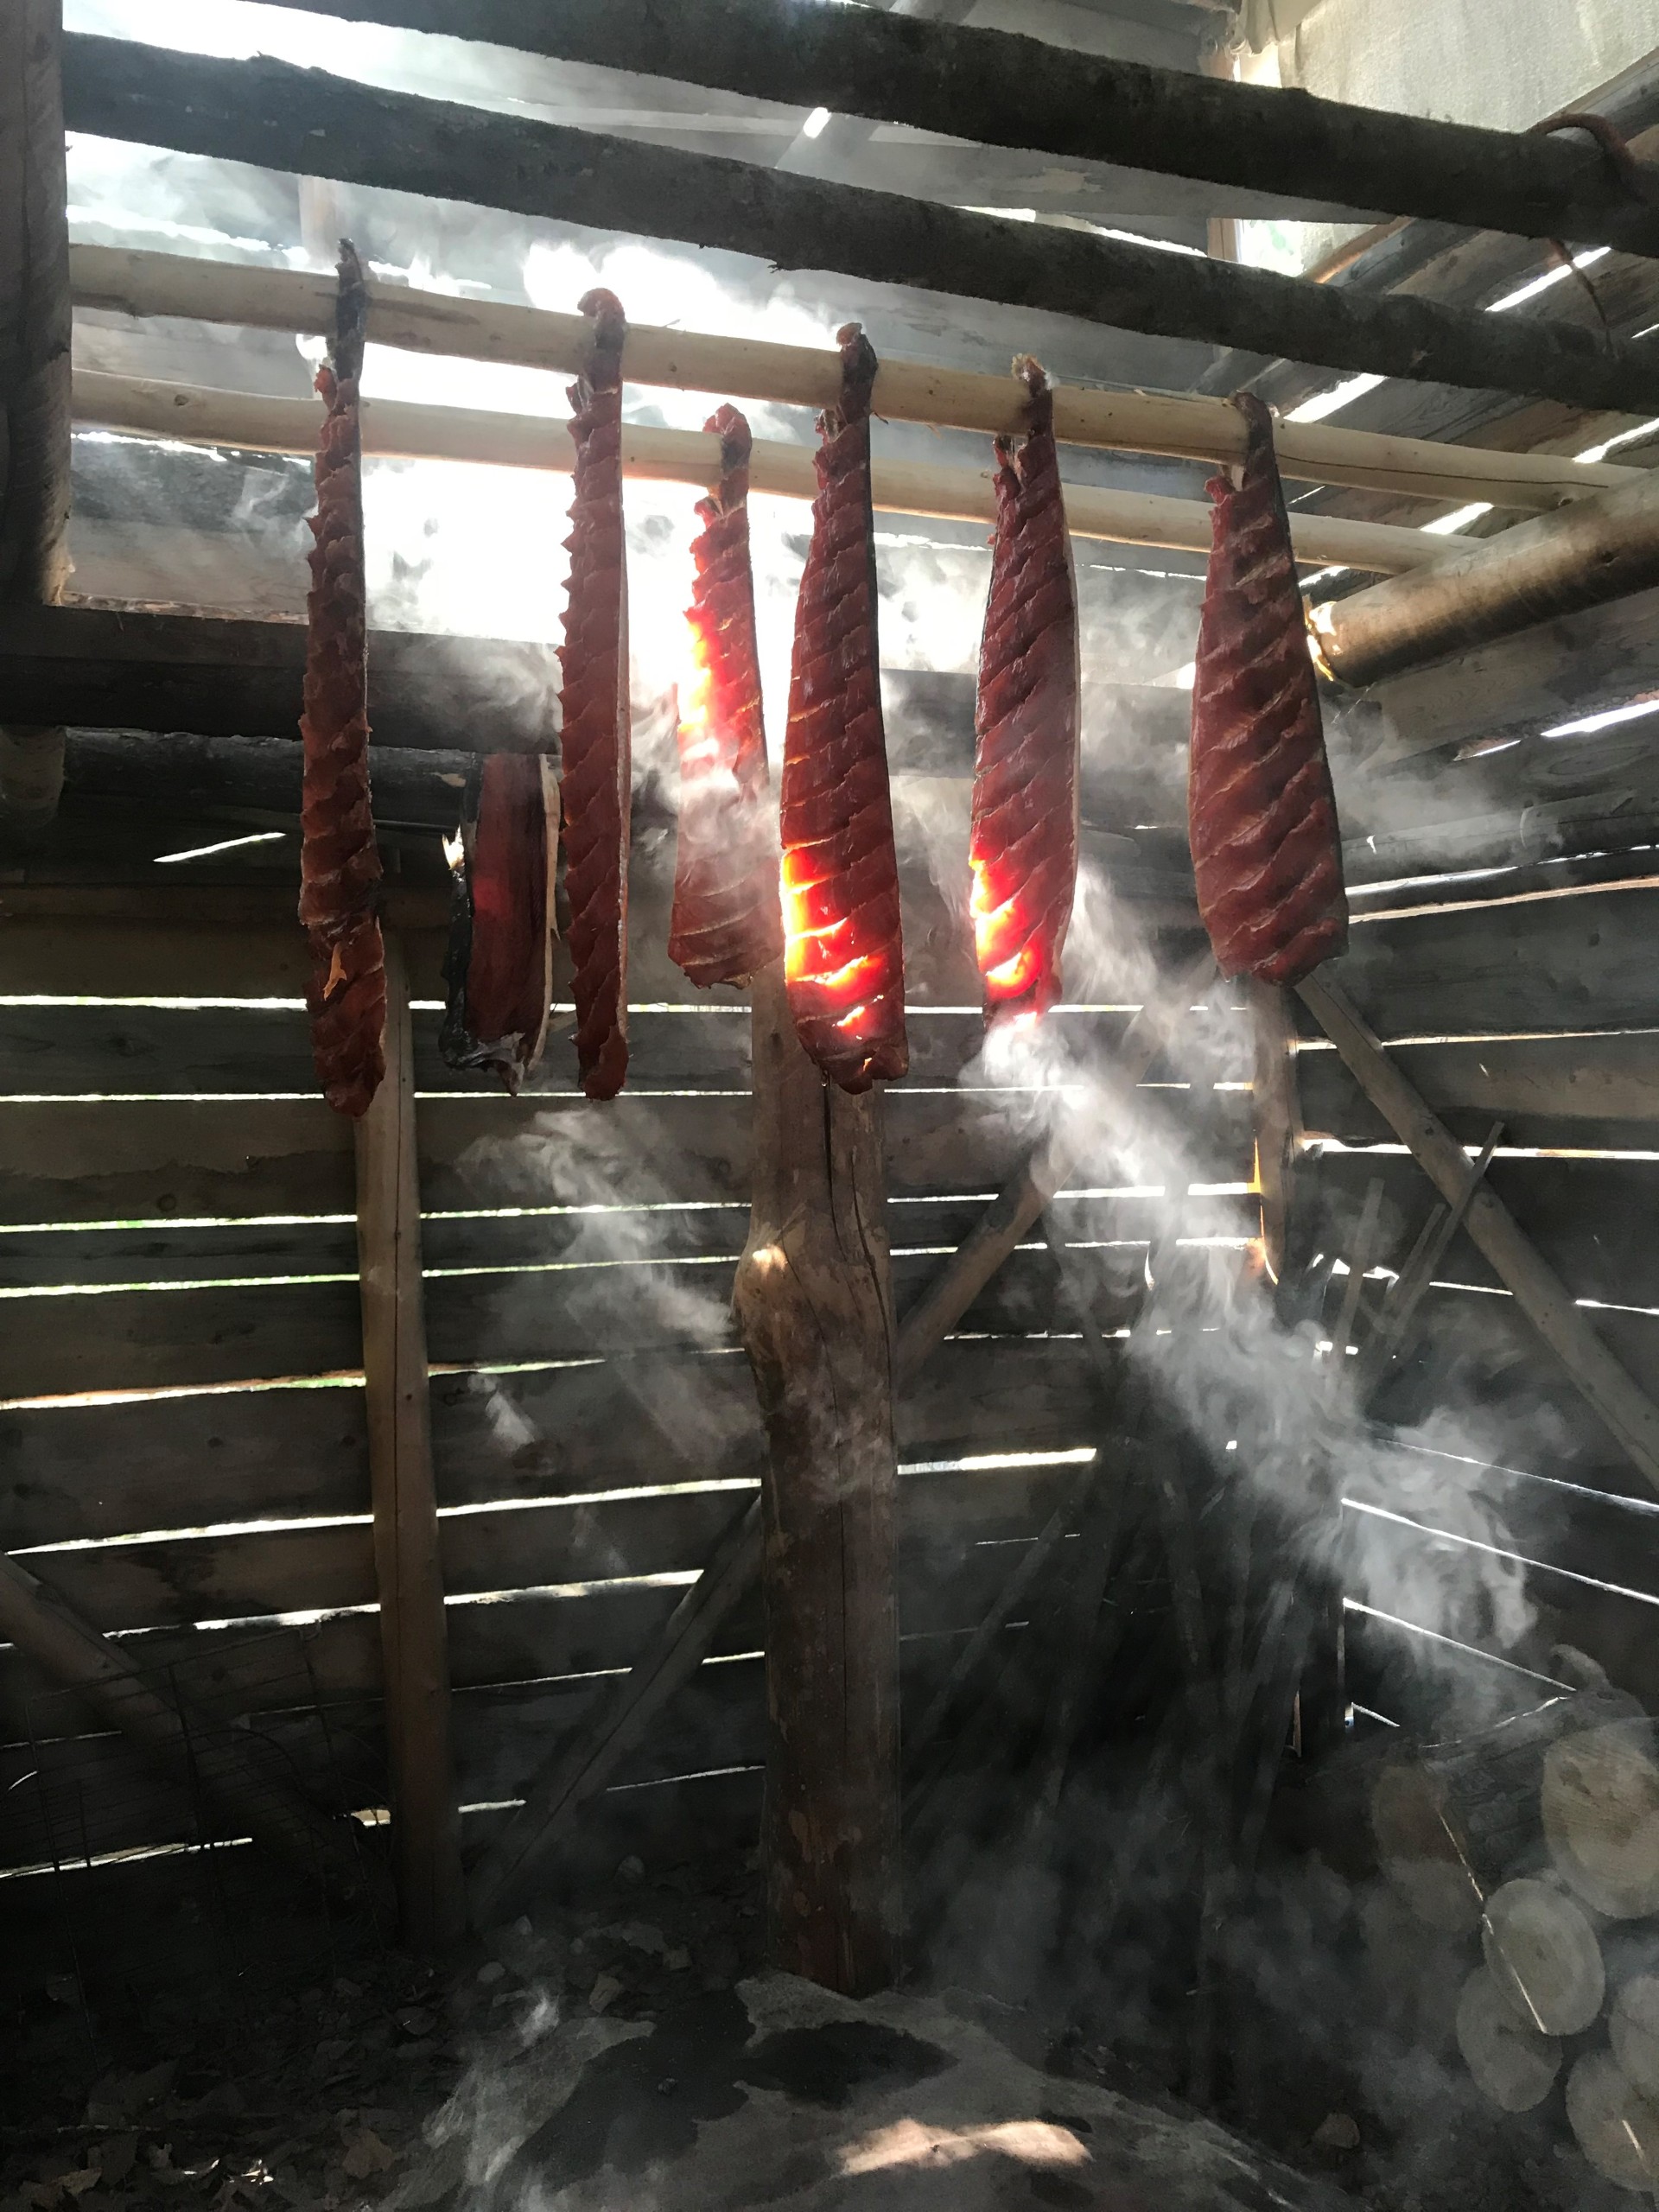 Salmon filets hanging off a rod in a smoky smokehouse. Decorative.